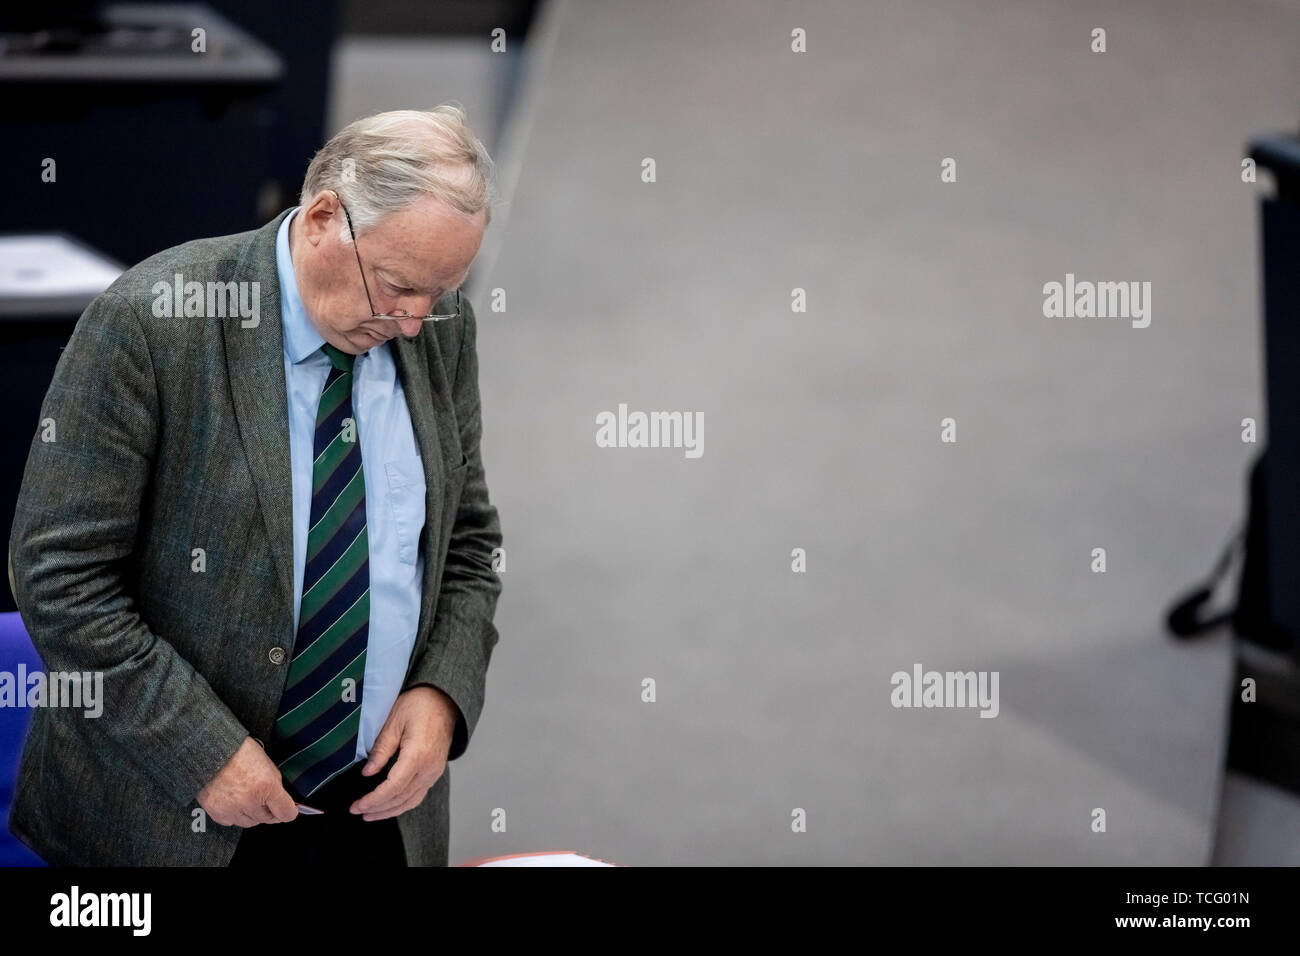 Berlin, Germany. 07th June, 2019. Alexander Gauland, chairman of the AfD parliamentary group, stands with his head bowed in the plenary hall of the Bundestag. The agenda includes votes on asylum and residence law, the Immigration of Experts Act and the Employment Promotion Act for Foreign Nationals. Credit: Christoph Soeder/dpa/Alamy Live News Stock Photo